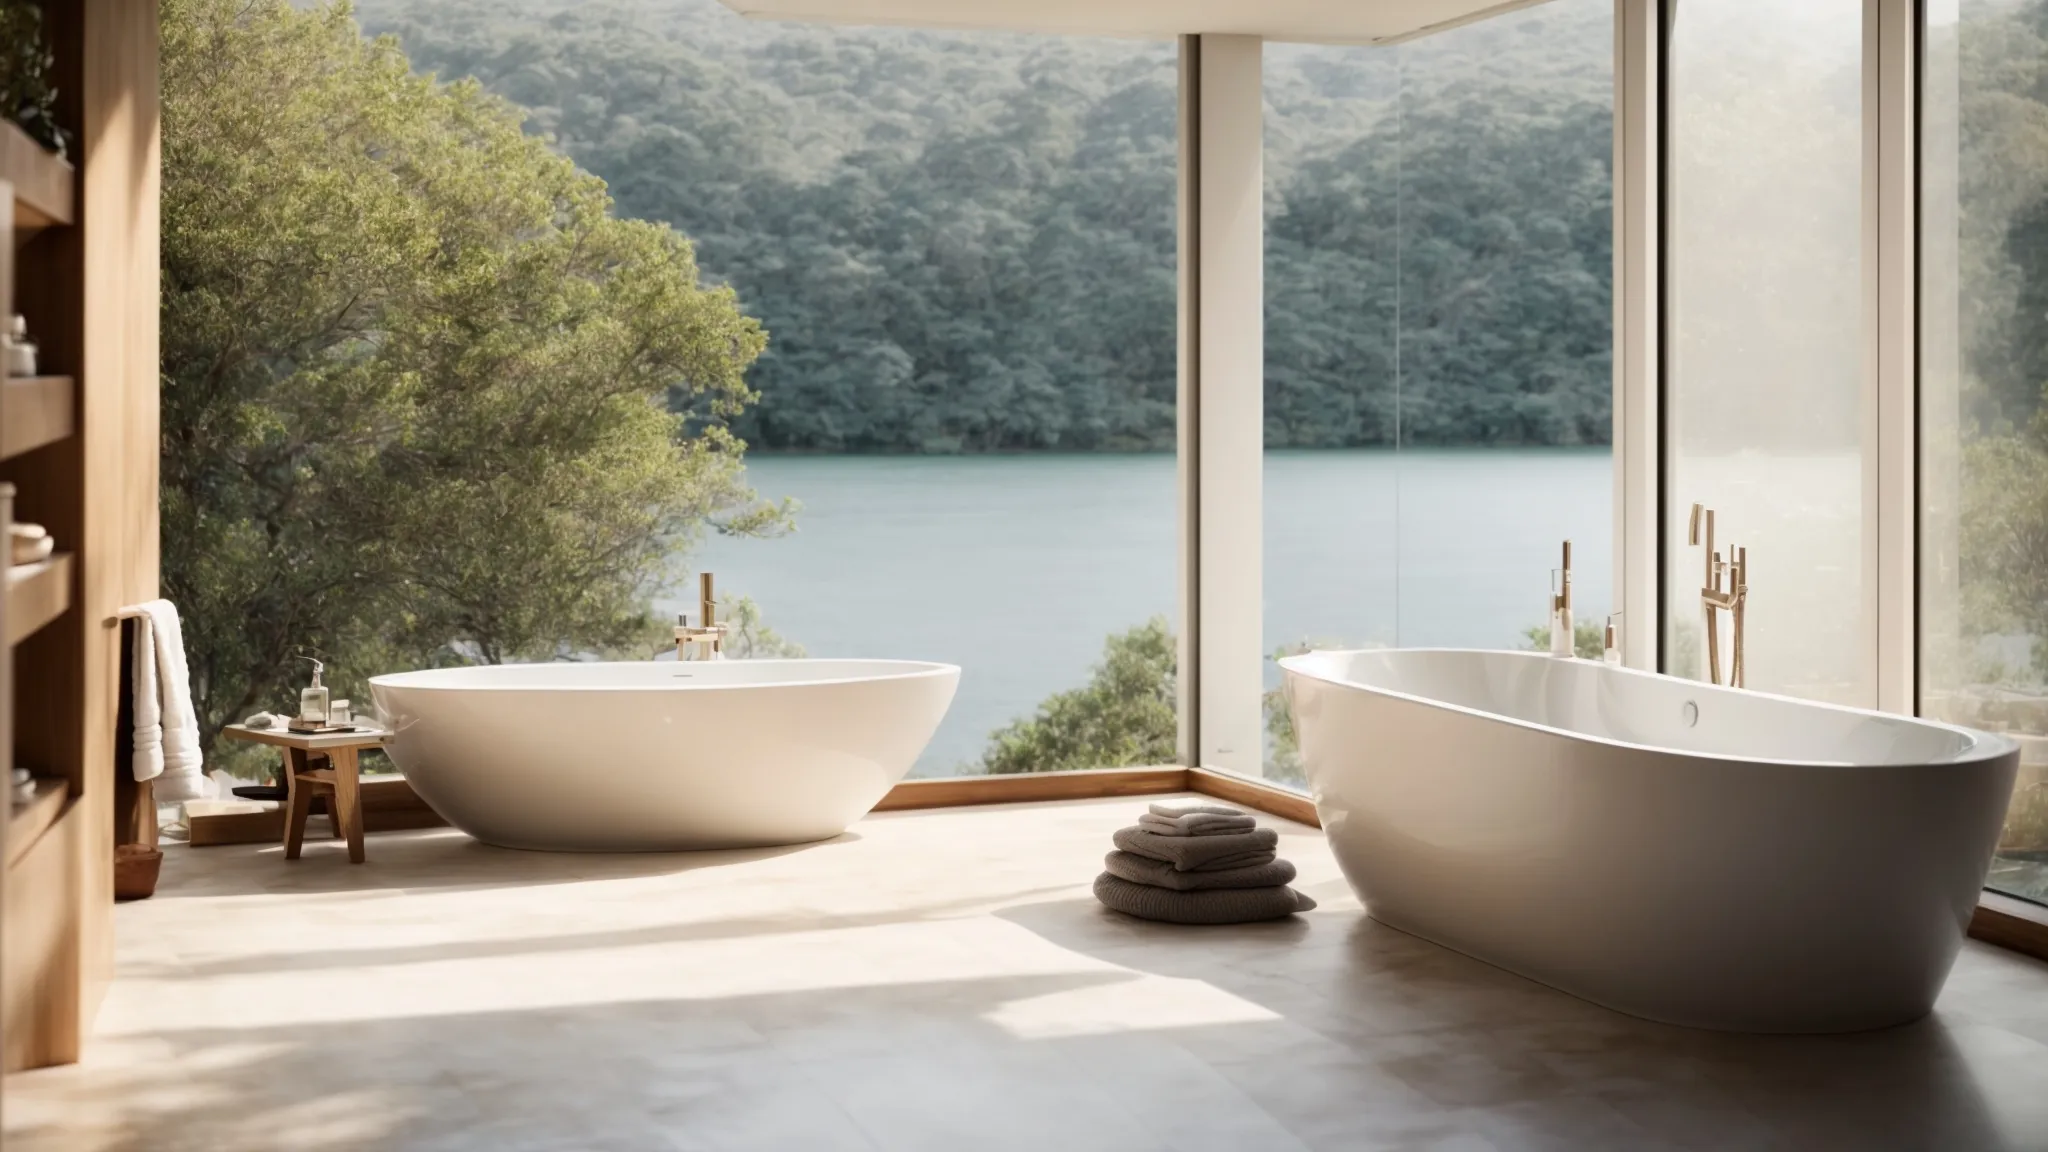 a serene corner bathtub nestled in a minimalistic and elegantly designed bathroom, overlooking a large window with a view.